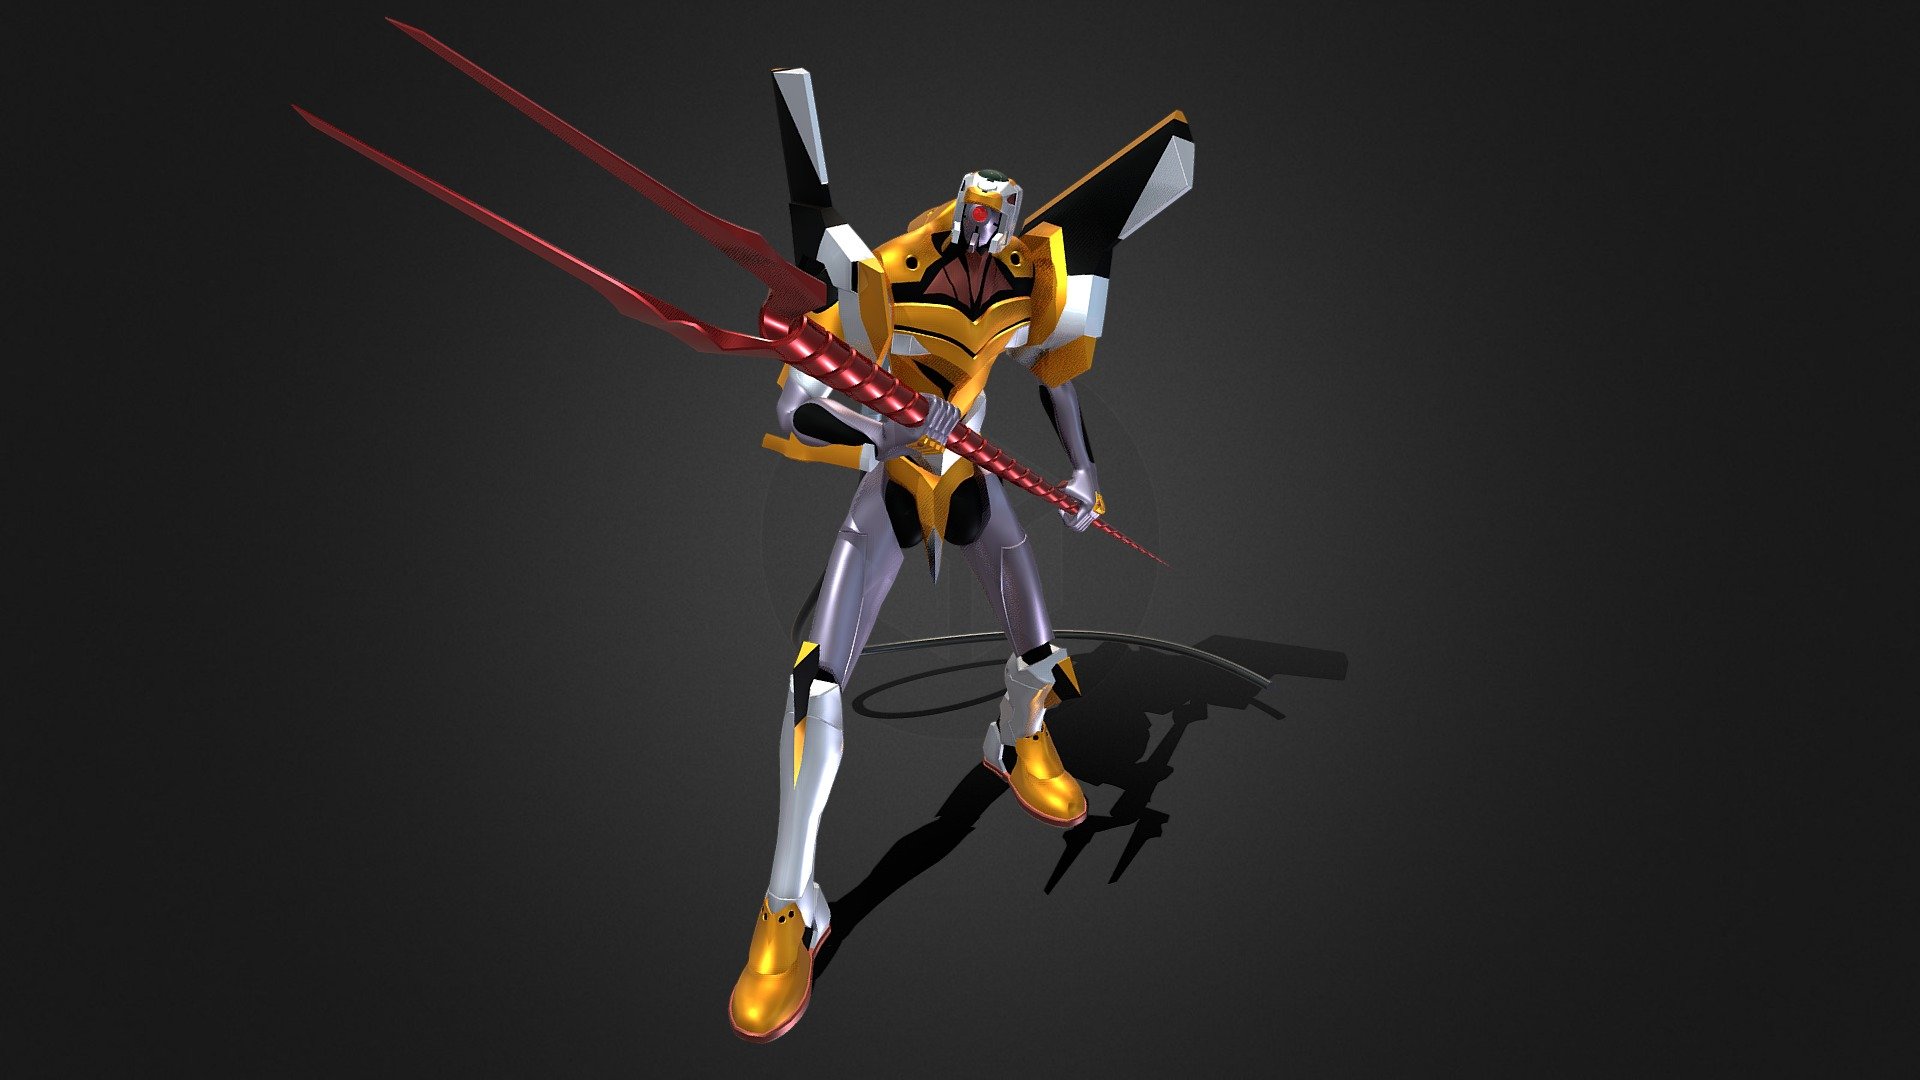 If you’re interested in purchasing any of my models, contact me @ andrewdisaacs@yahoo.com

Evangelion Unit 00 as seen from the anime Neon Genesis Evangelion.

Made in 3DS Max by myself 3d model